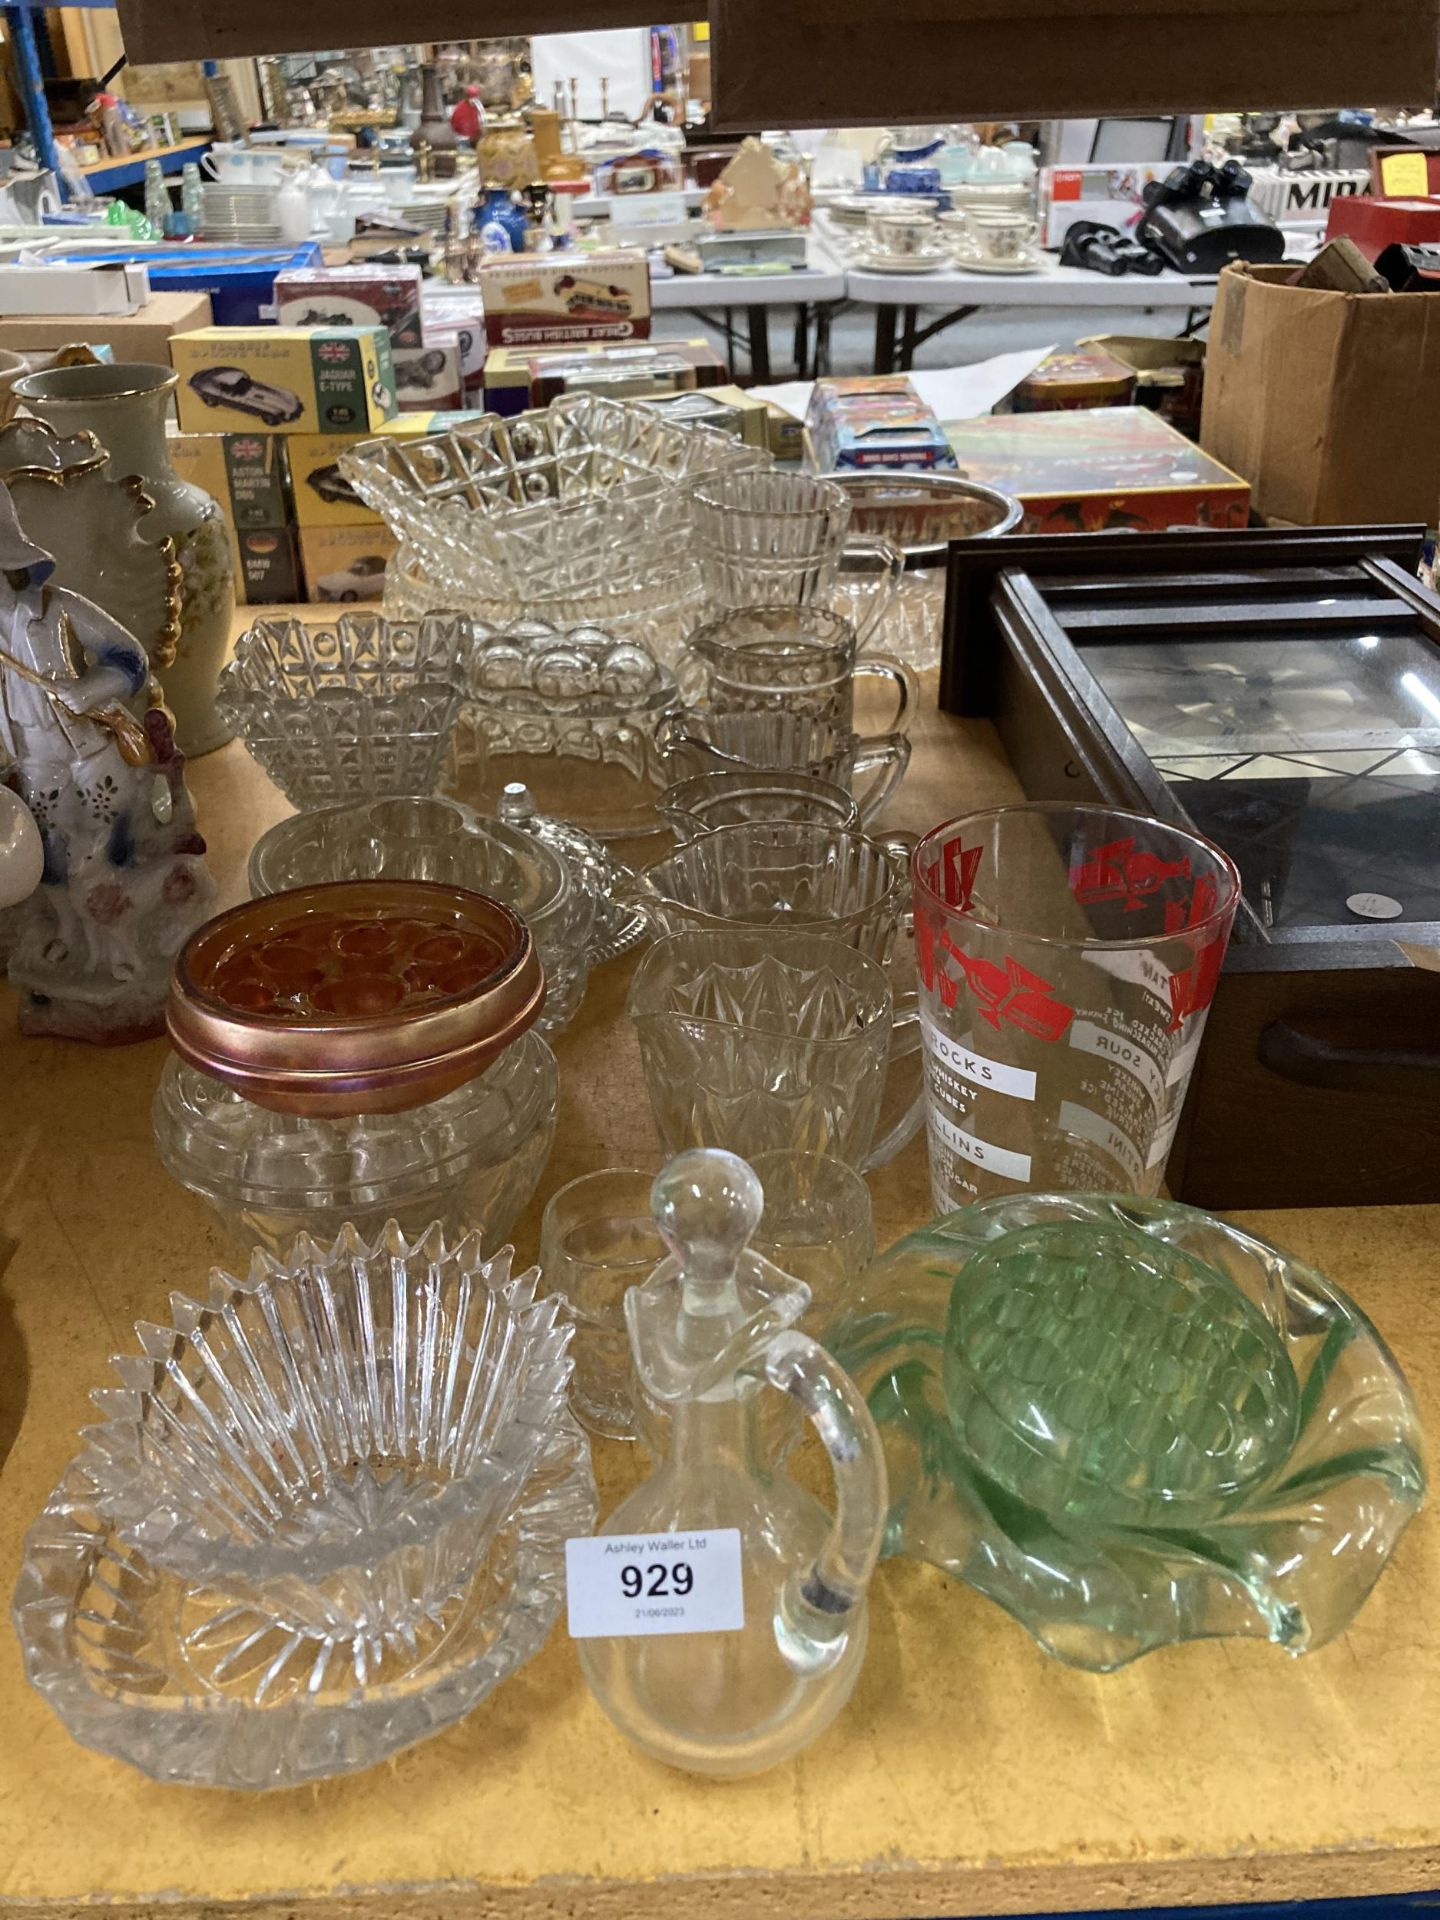 A LARGE QUANTITY OF VINTAGE GLASSWARE TO INCLUDE BOWLS, JUGS, A JELLY MOULD, ETC